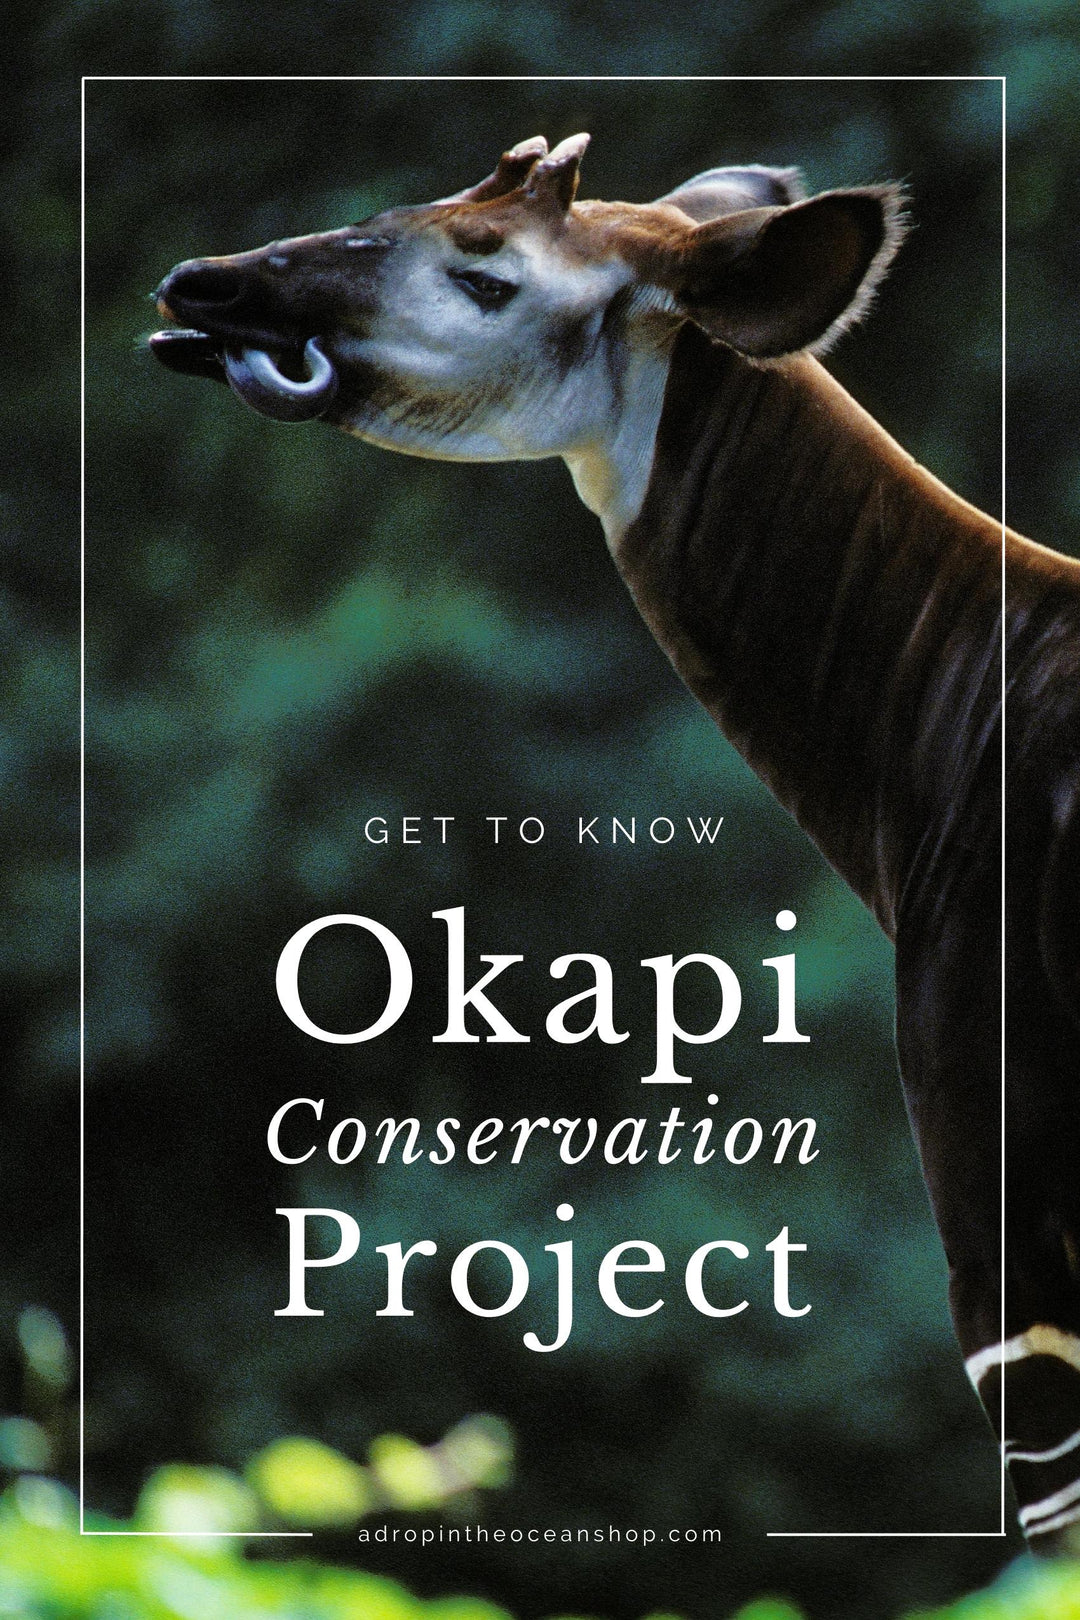 A Drop in the Ocean Zero Waste Store: Get to Know Okapi Conservation Project